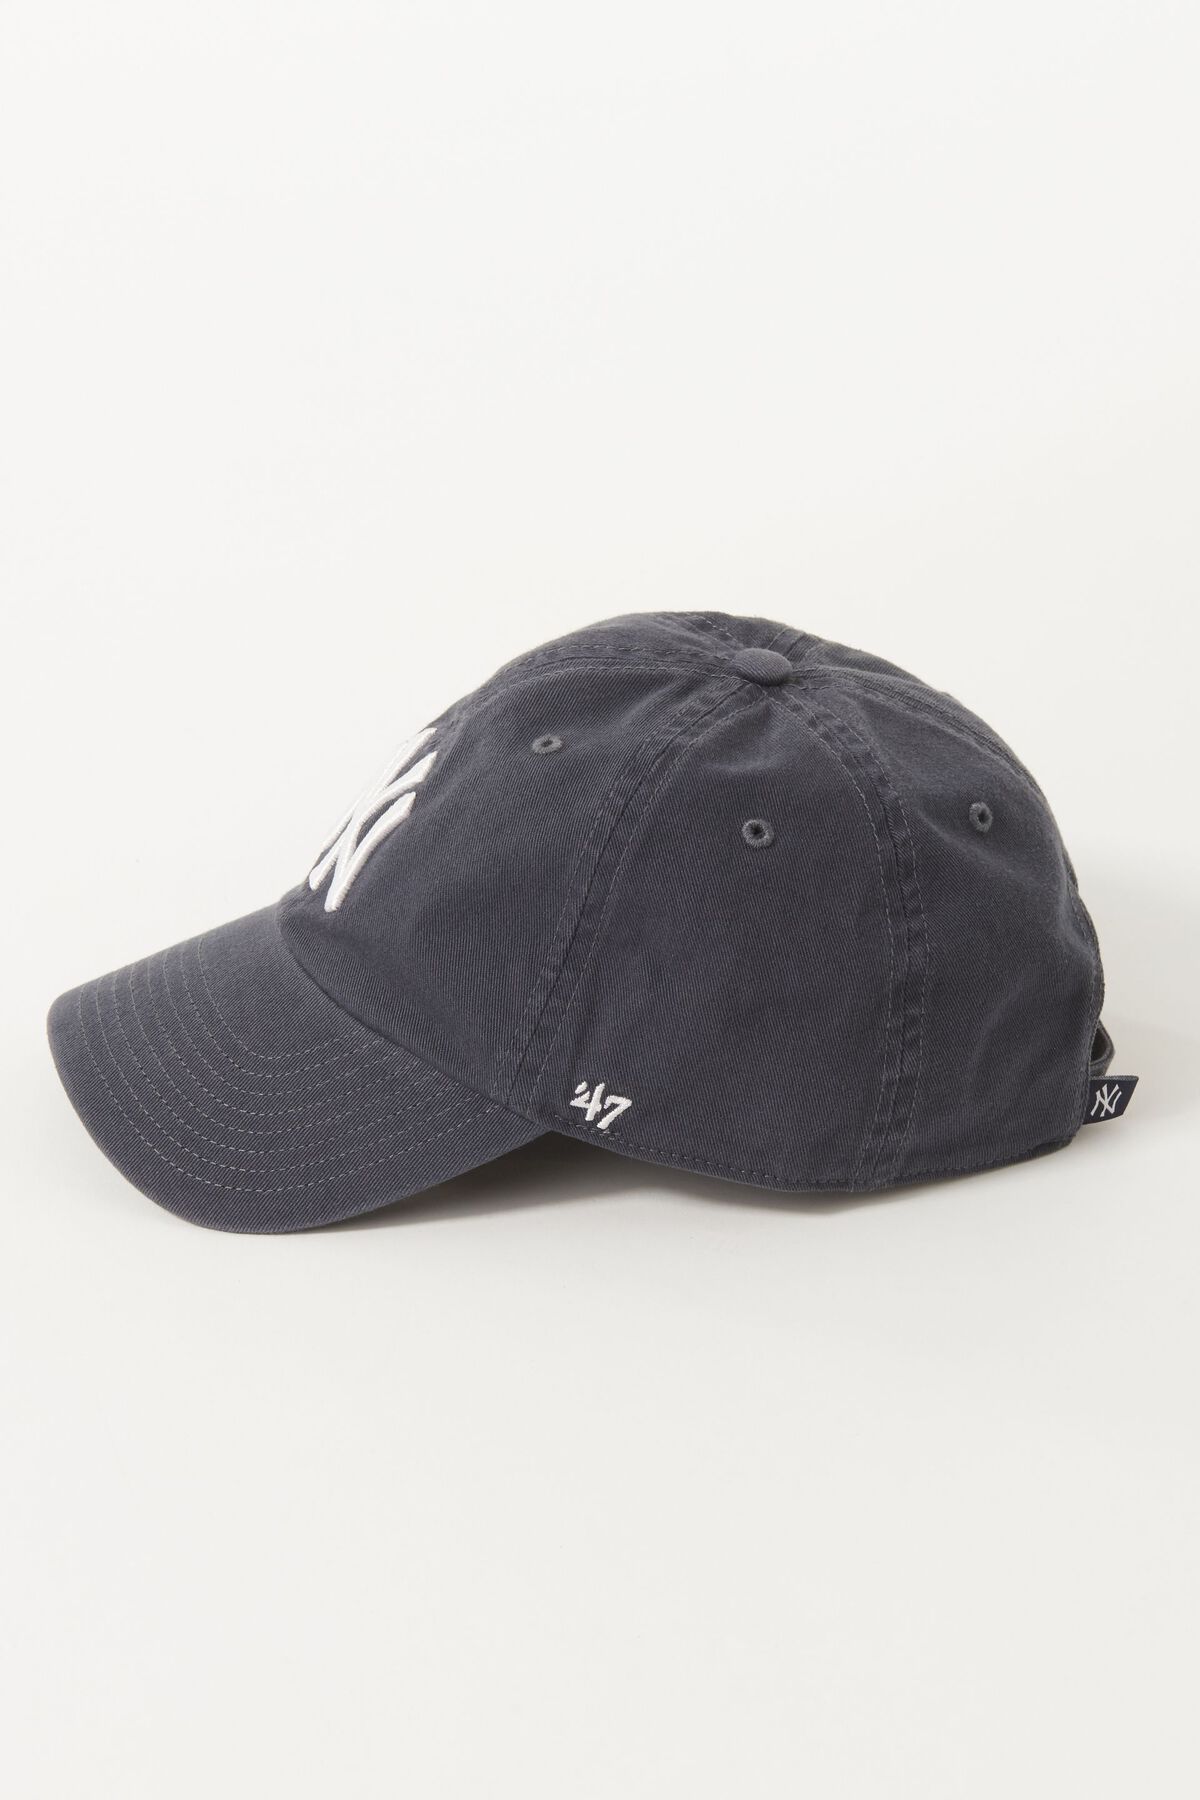 Garage 47 BRAND Clean Up Cap - NY. 3